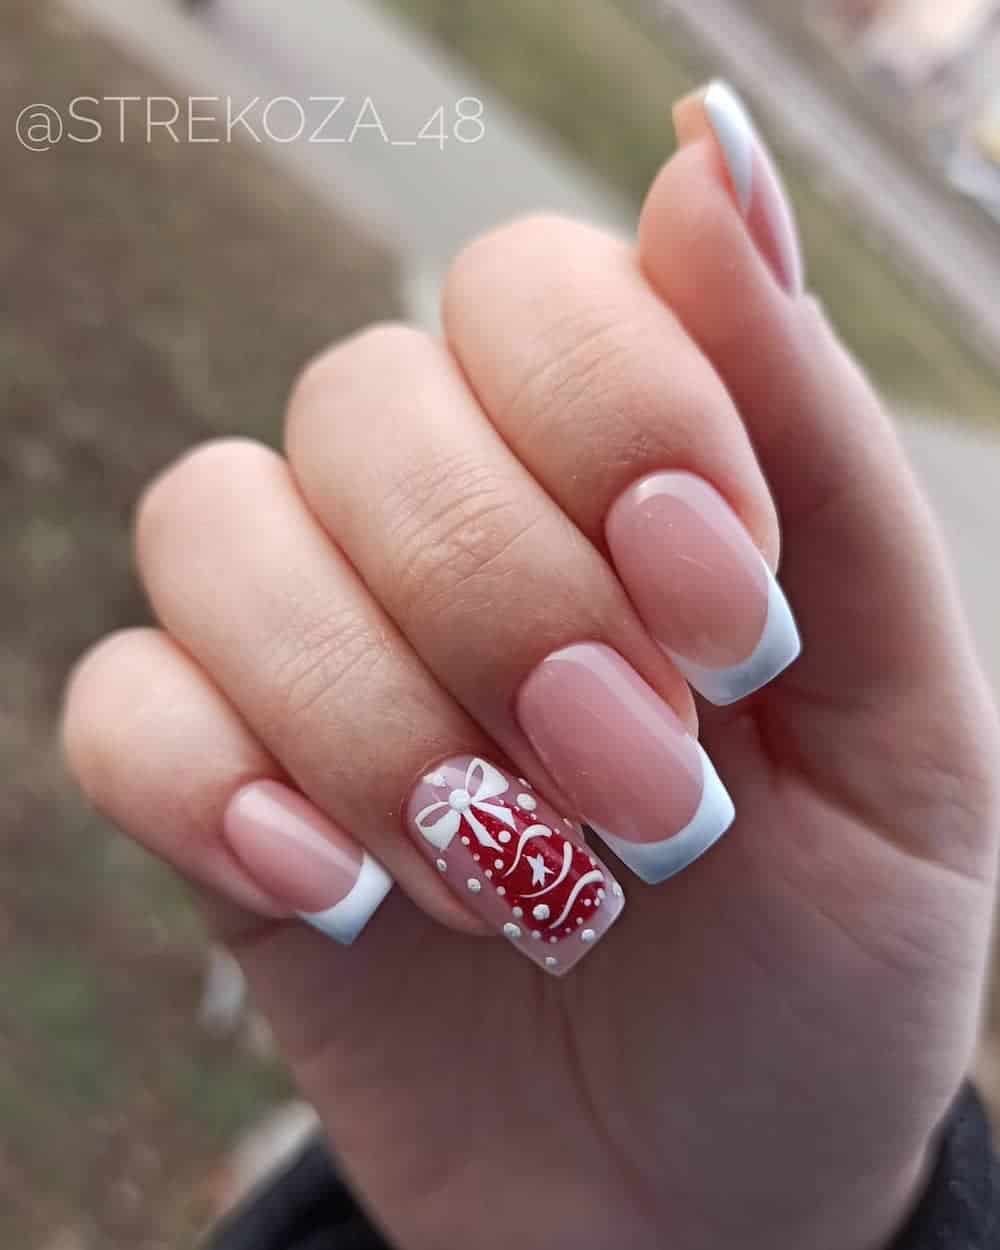 White french tip manicure with red Christmas ornament detail.